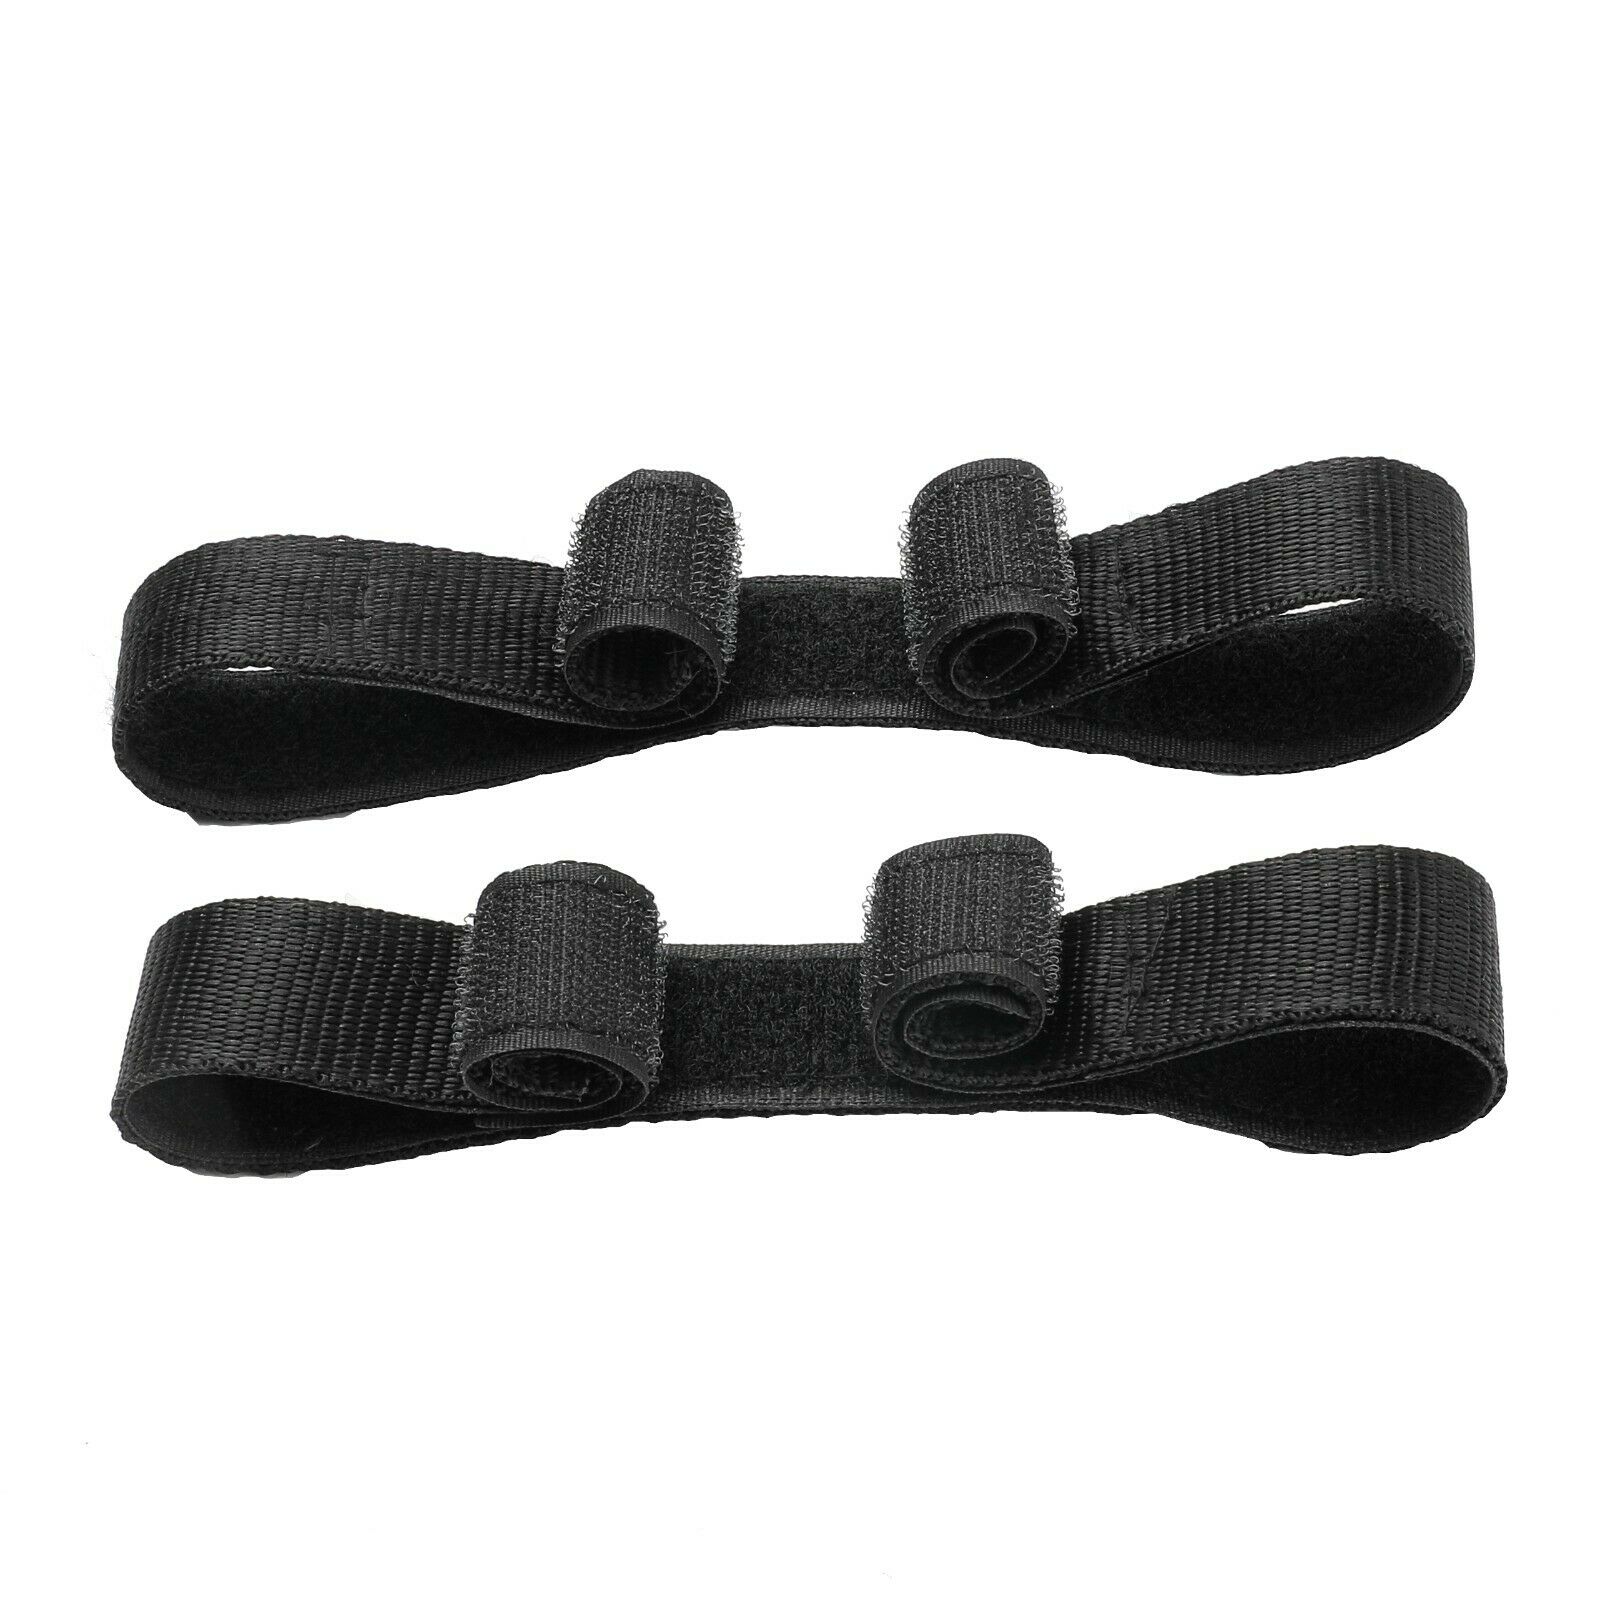 2x Replacement Velcro Straps for Hoverkart Go Kart For Segway Electric Scooters 